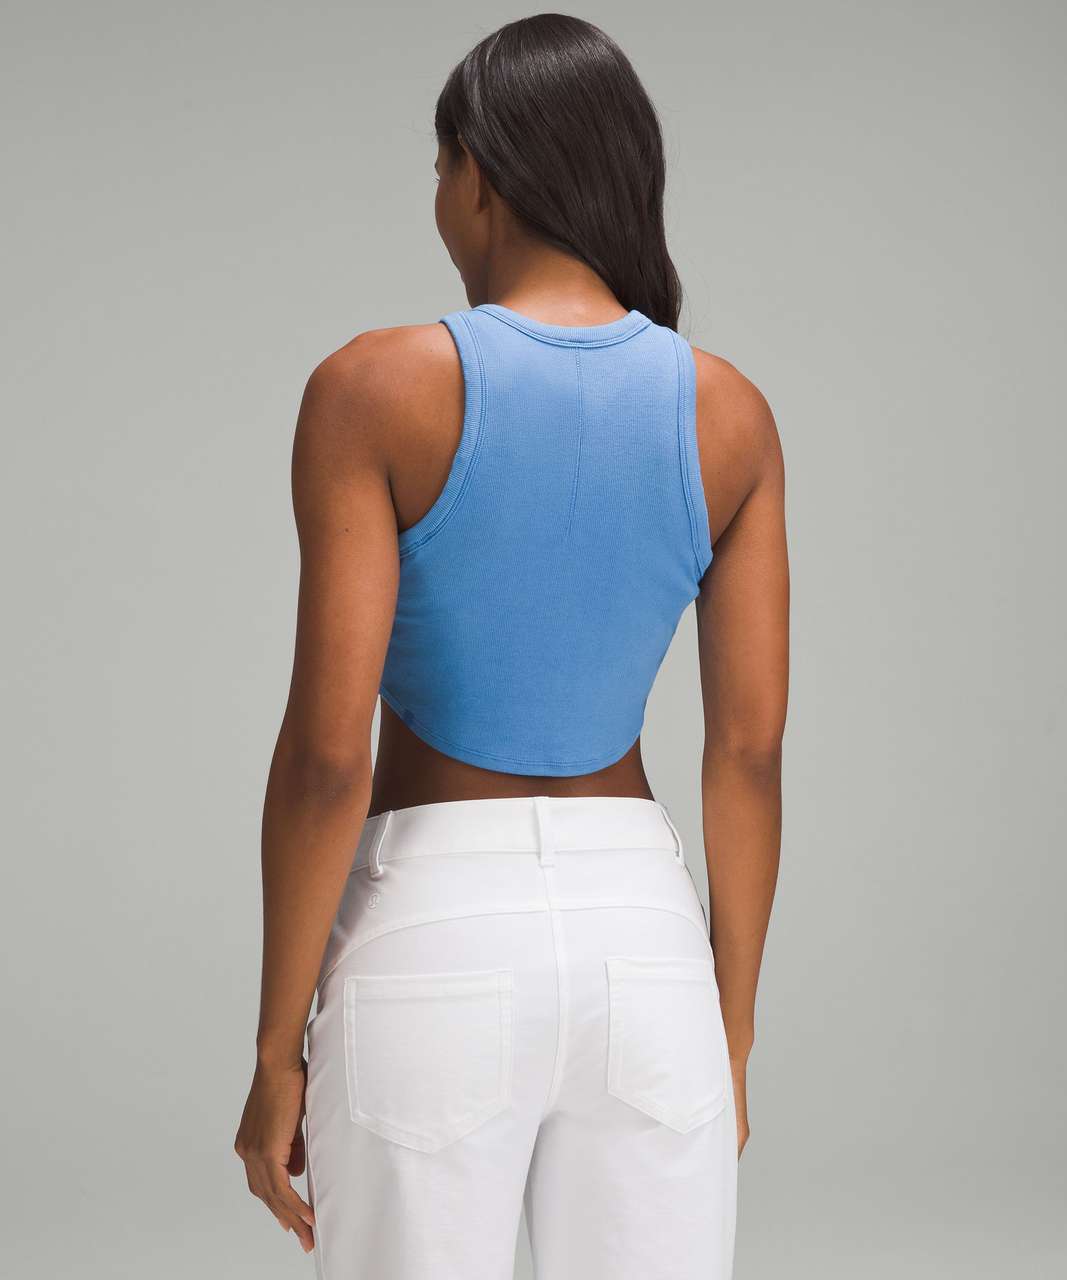 Lululemon Hold Tight Cropped Tank Top - Blue Nile